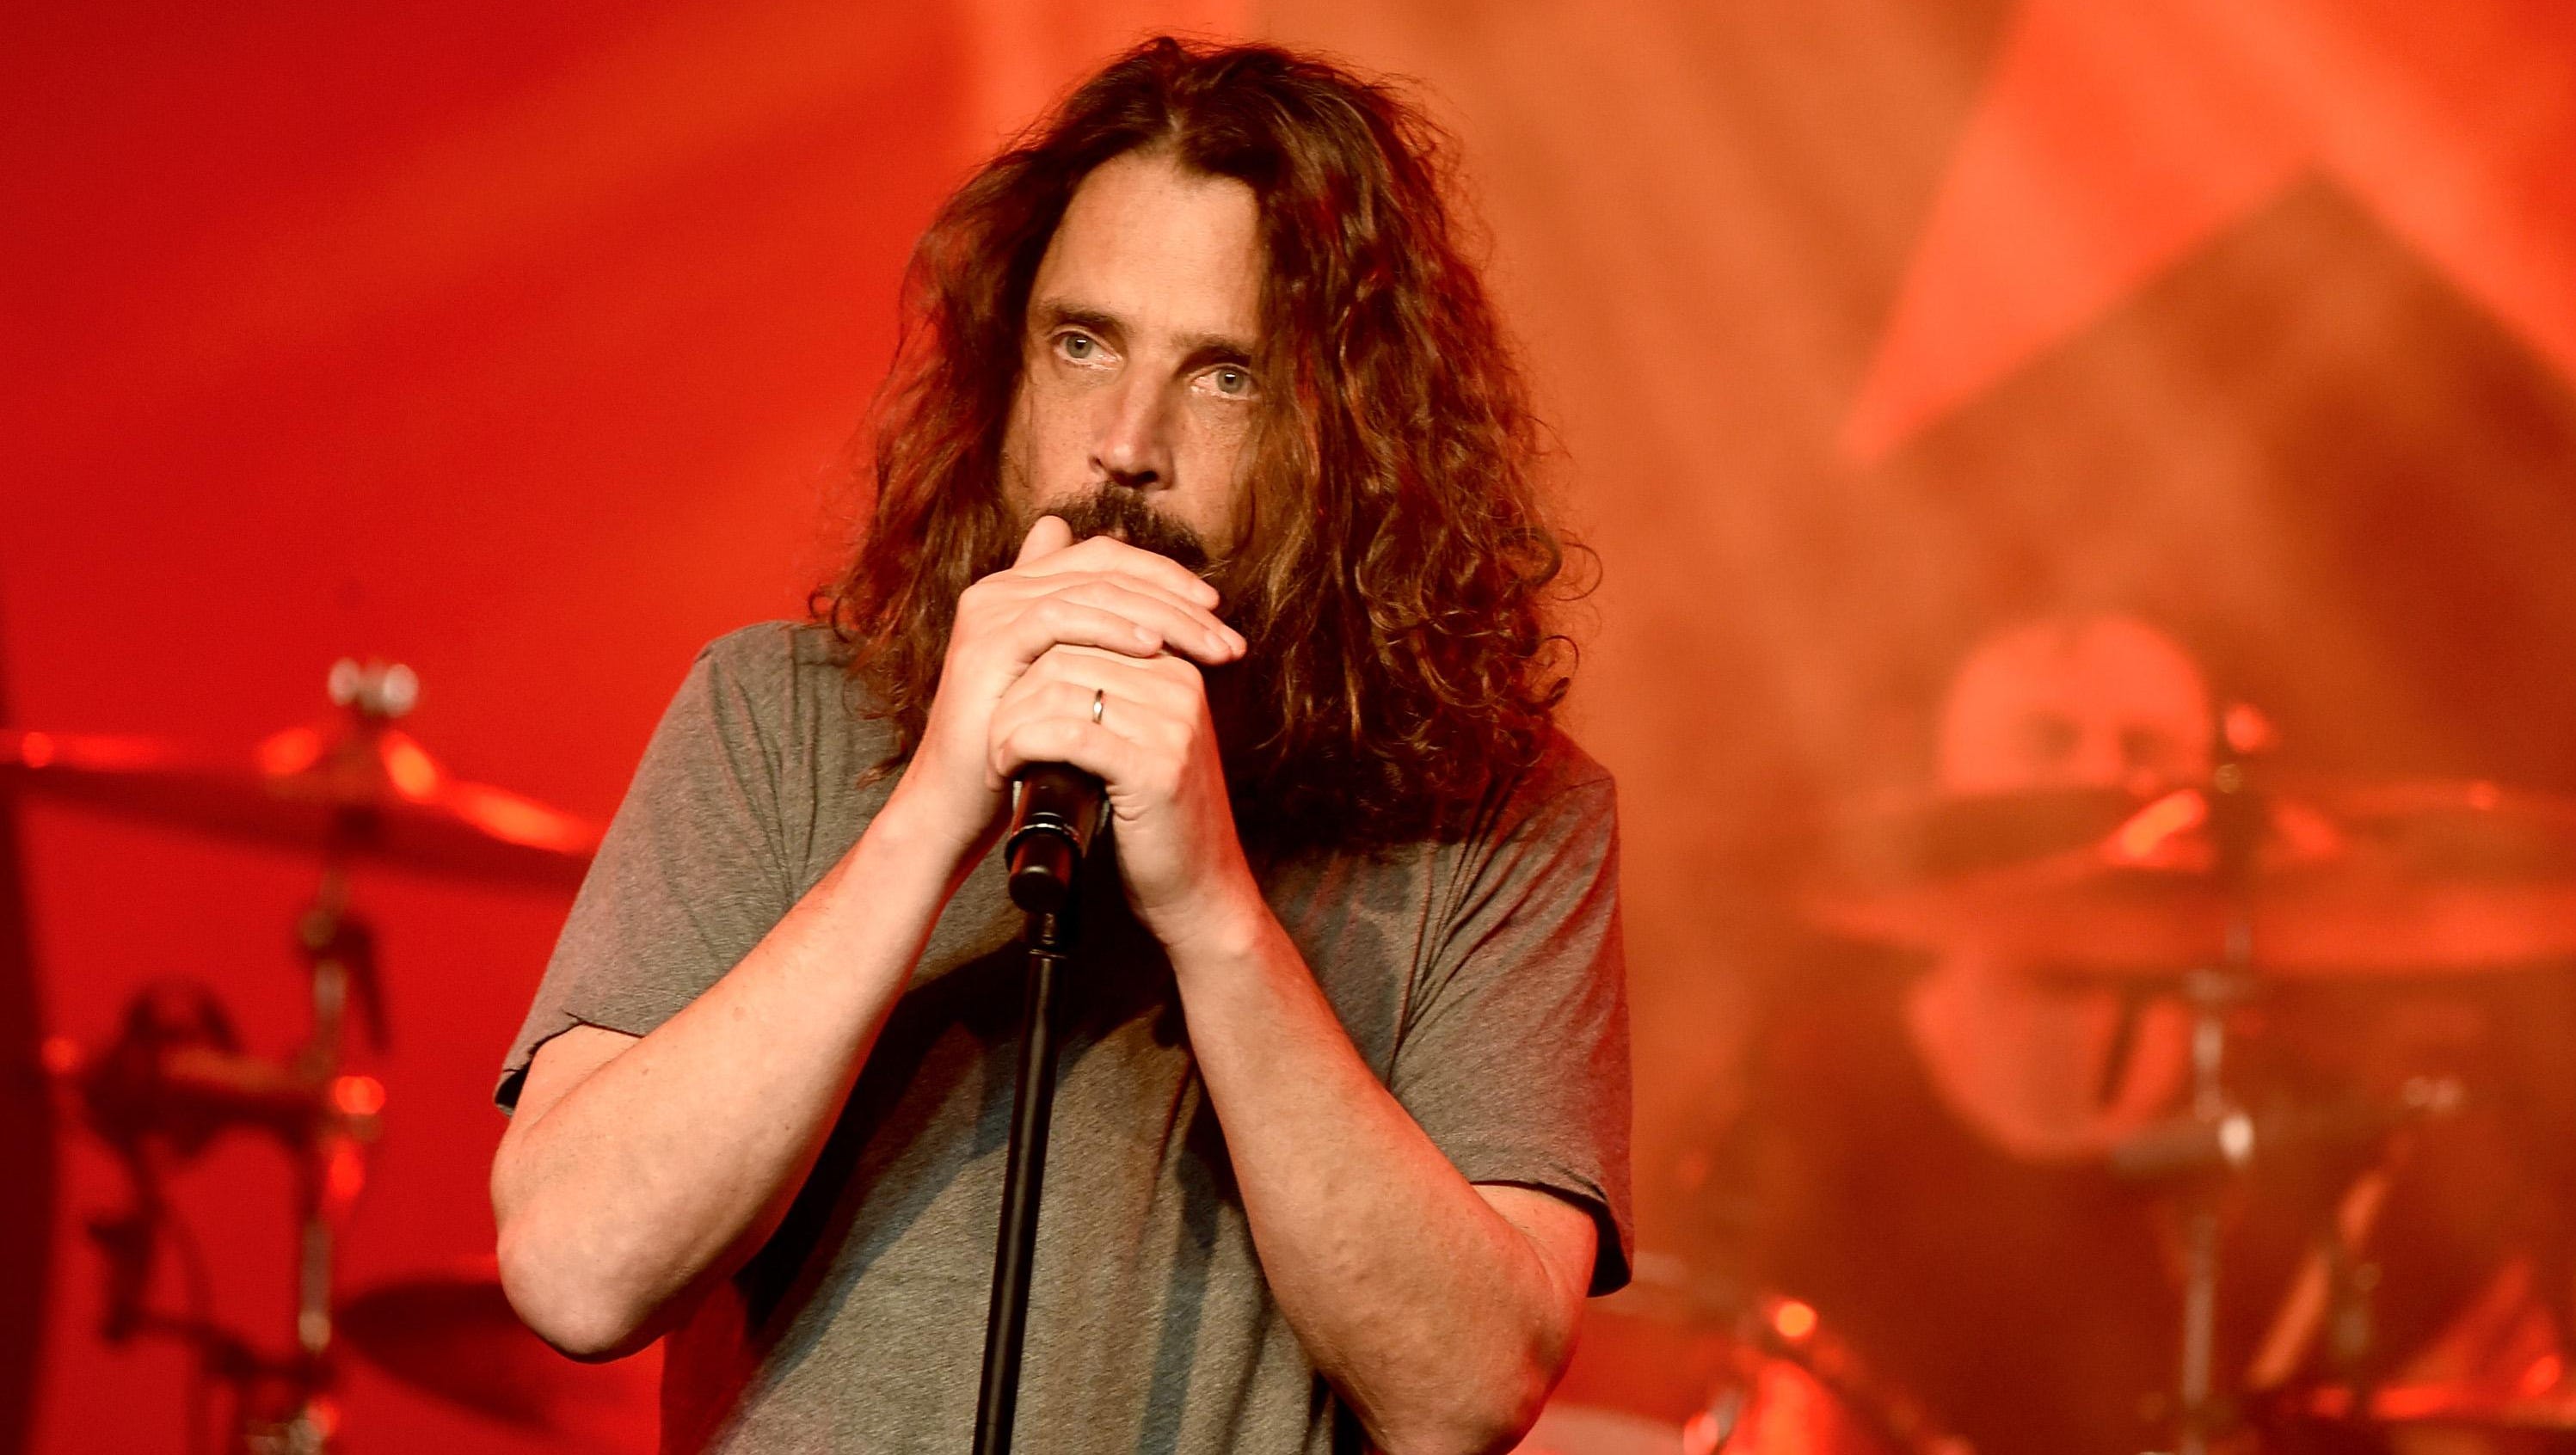 The late Chris Cornell, former frontman for Soundgarden, was nominated for best rock performance for "The Promise."